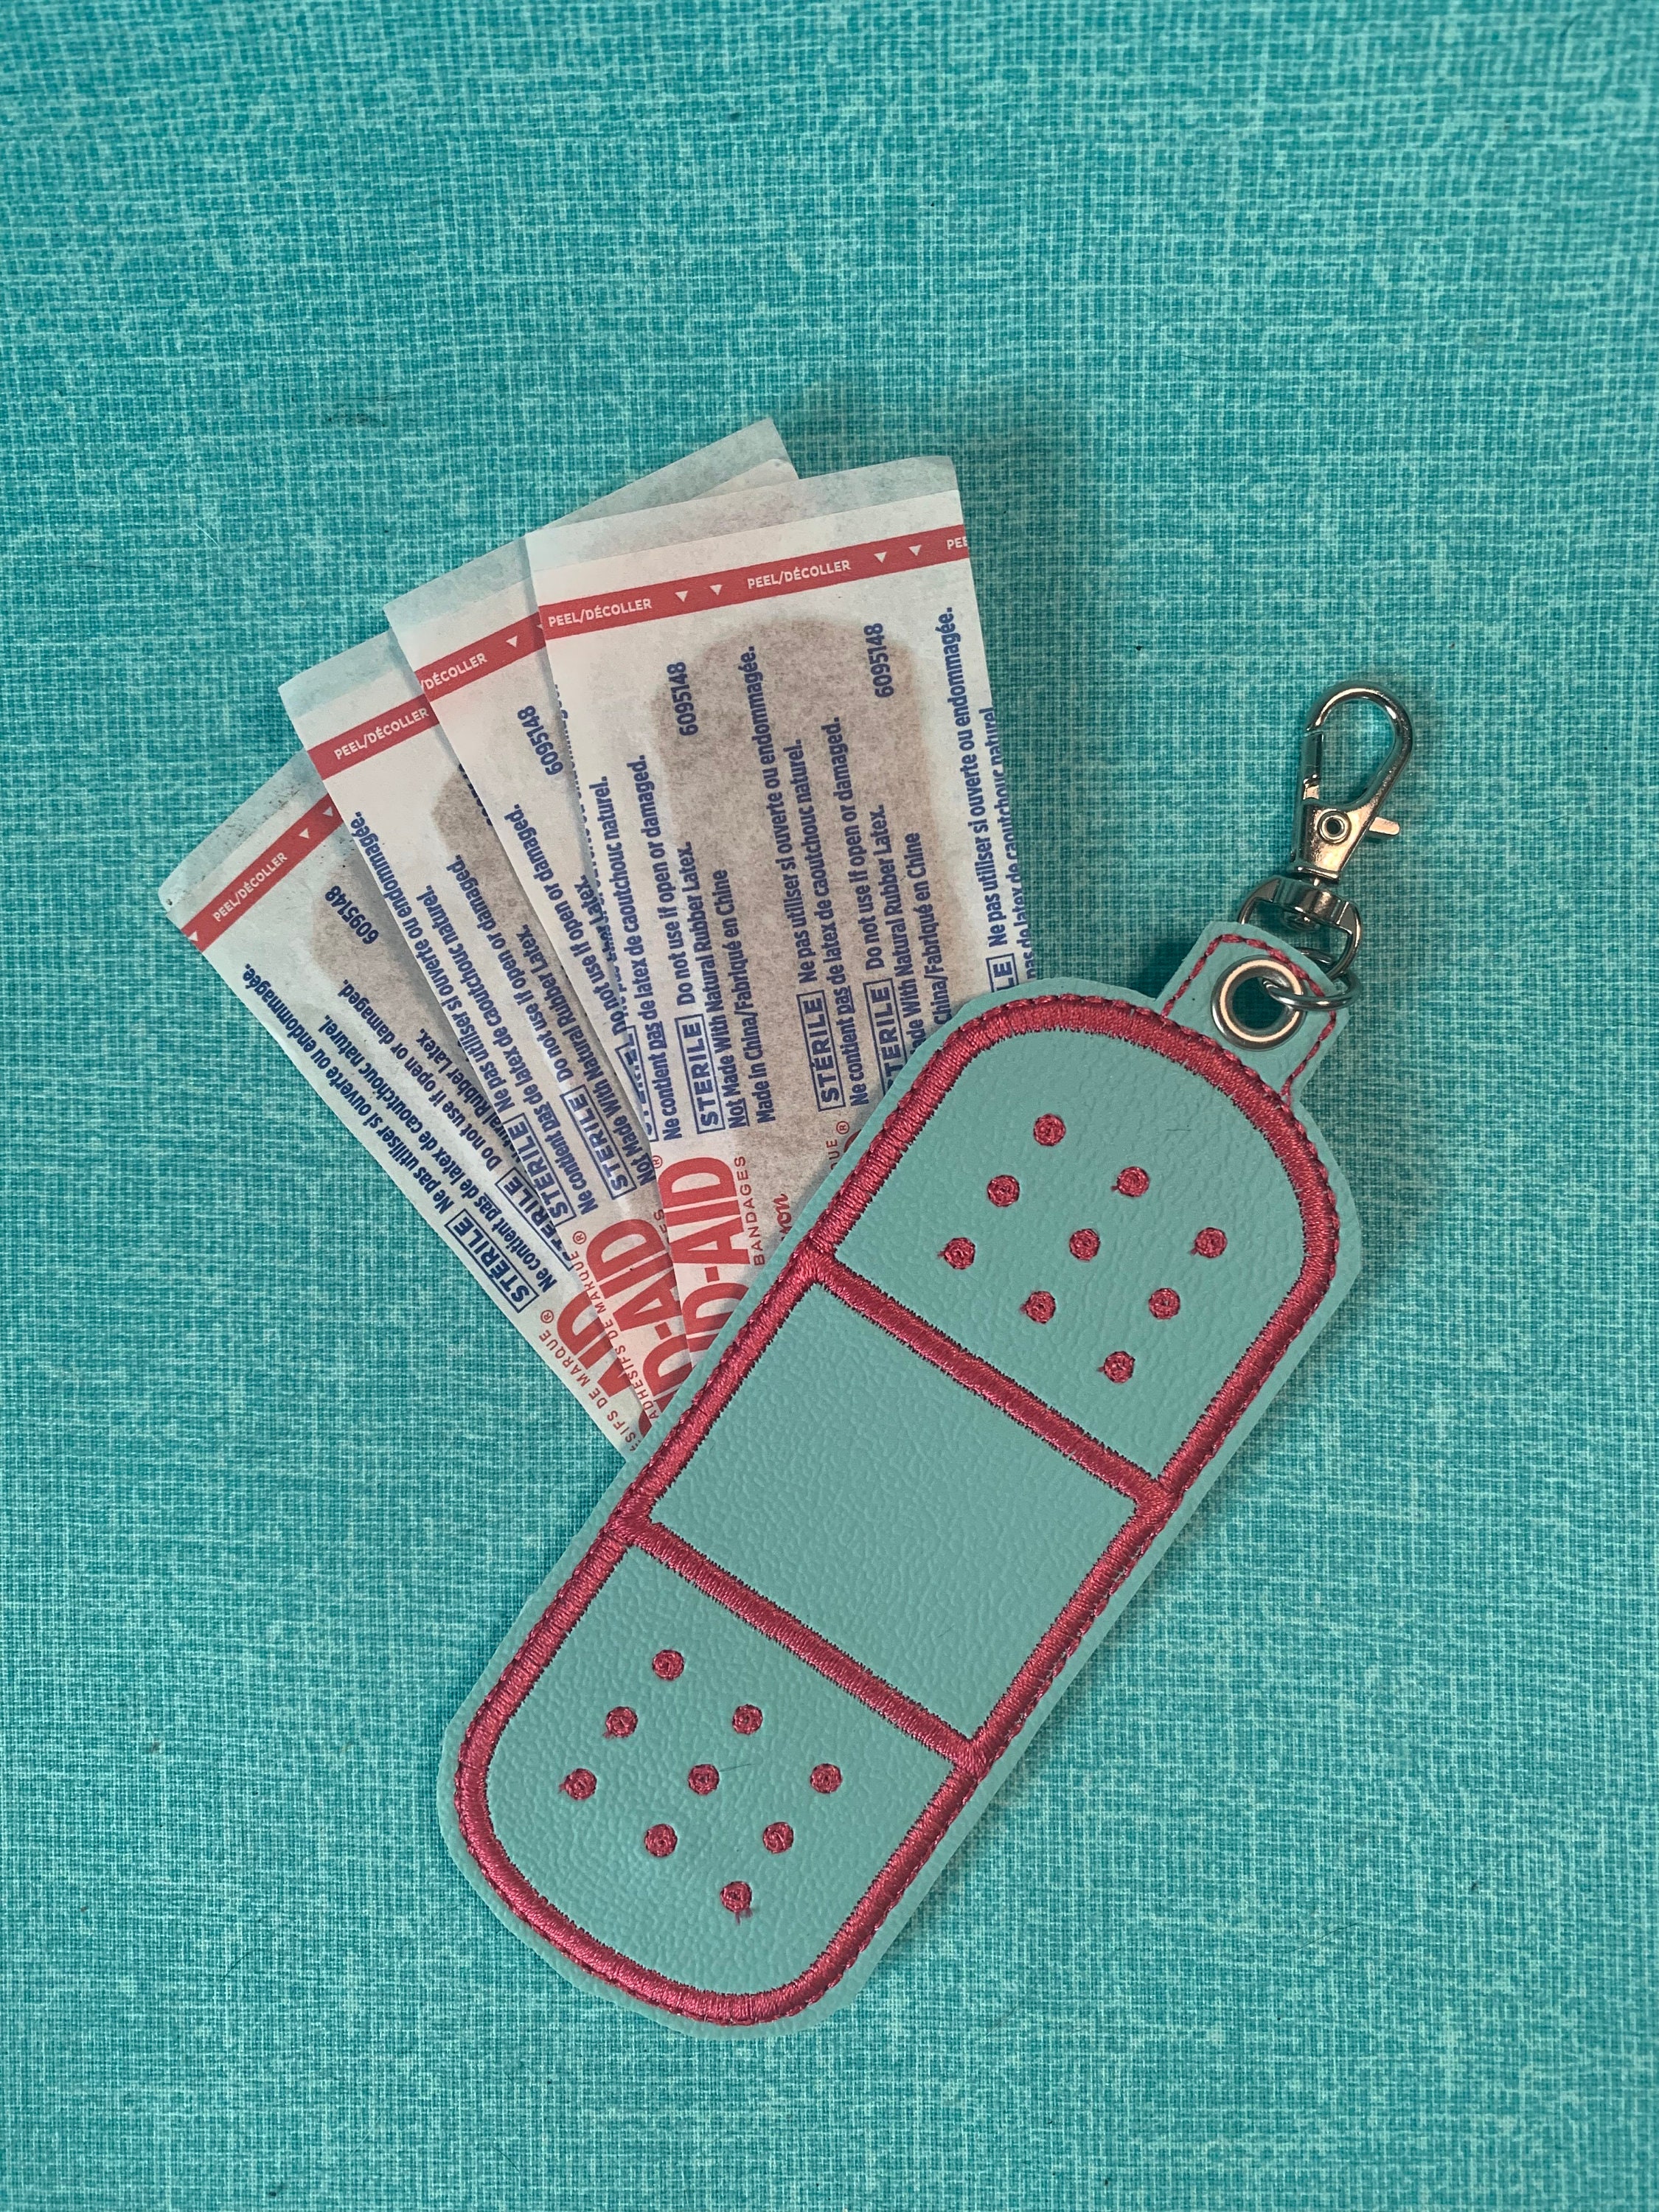 Bandaid Holder Keychain-Perfect For Teachers, Parents, Students, Kids, Etc